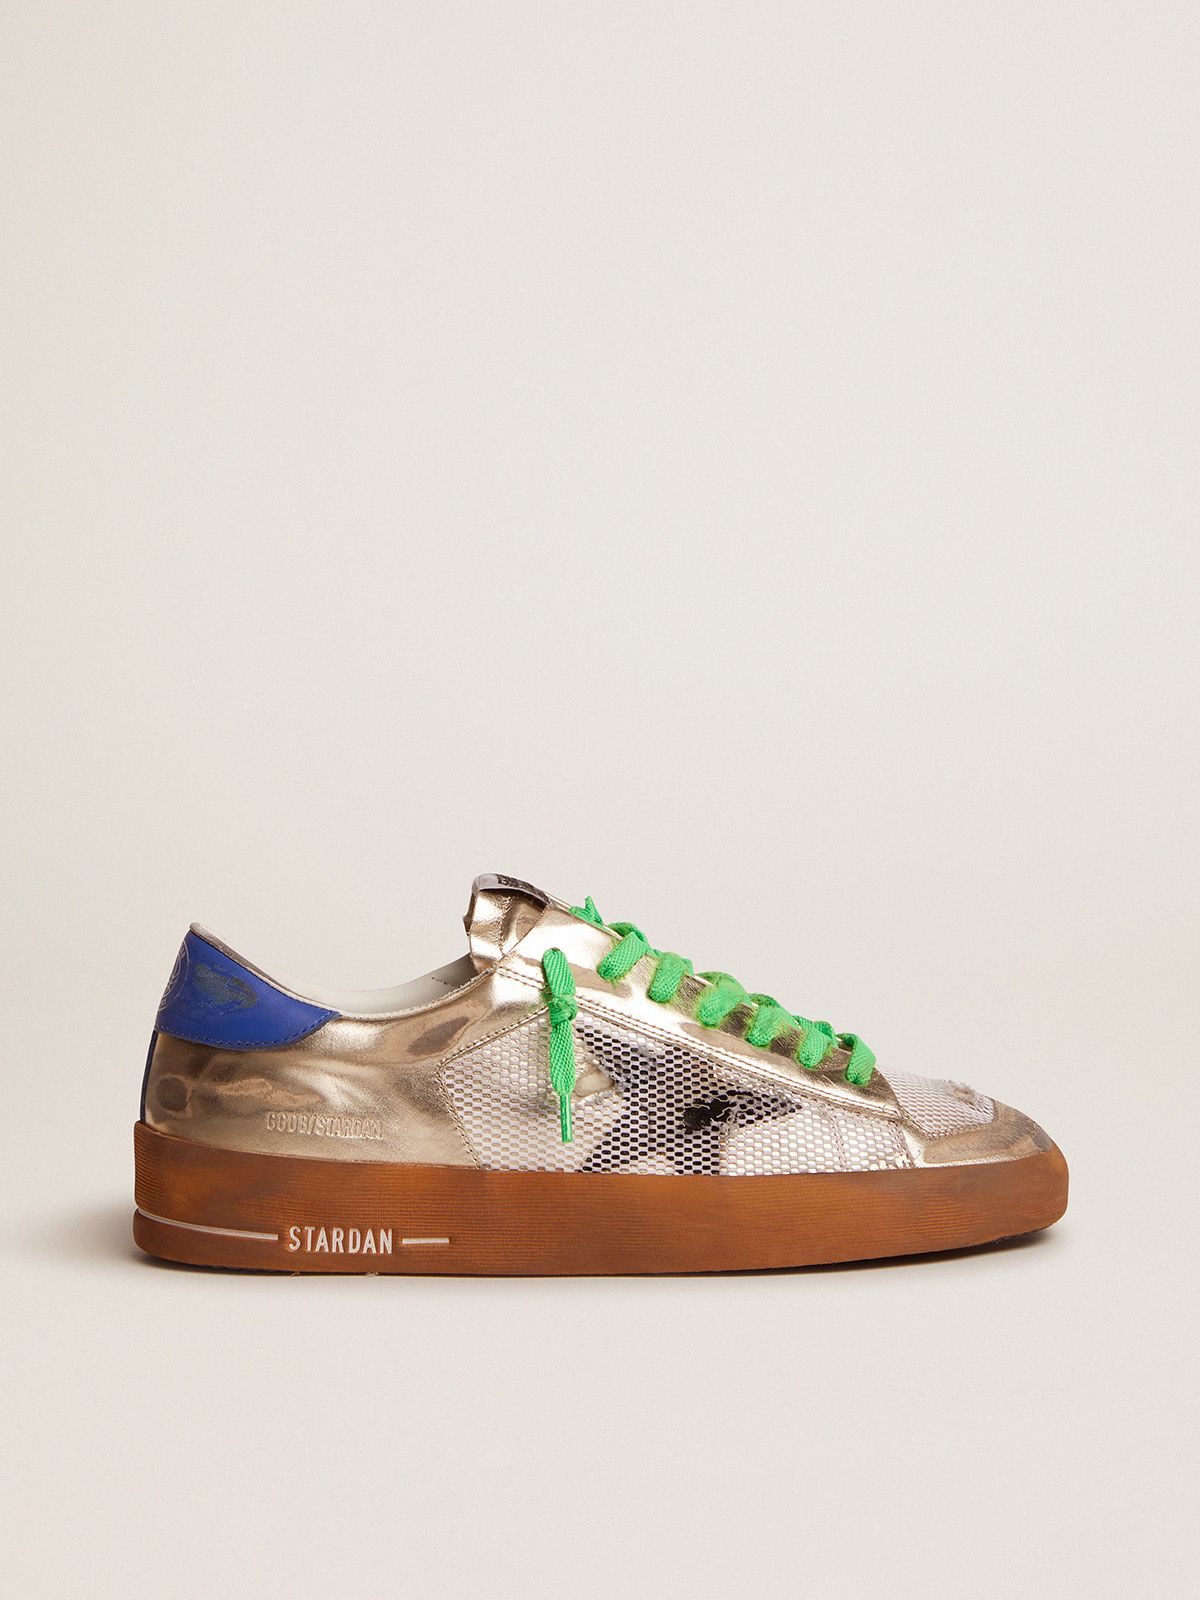 Stardan LAB sneakers in laminated leather and mesh with an electric blue heel tab